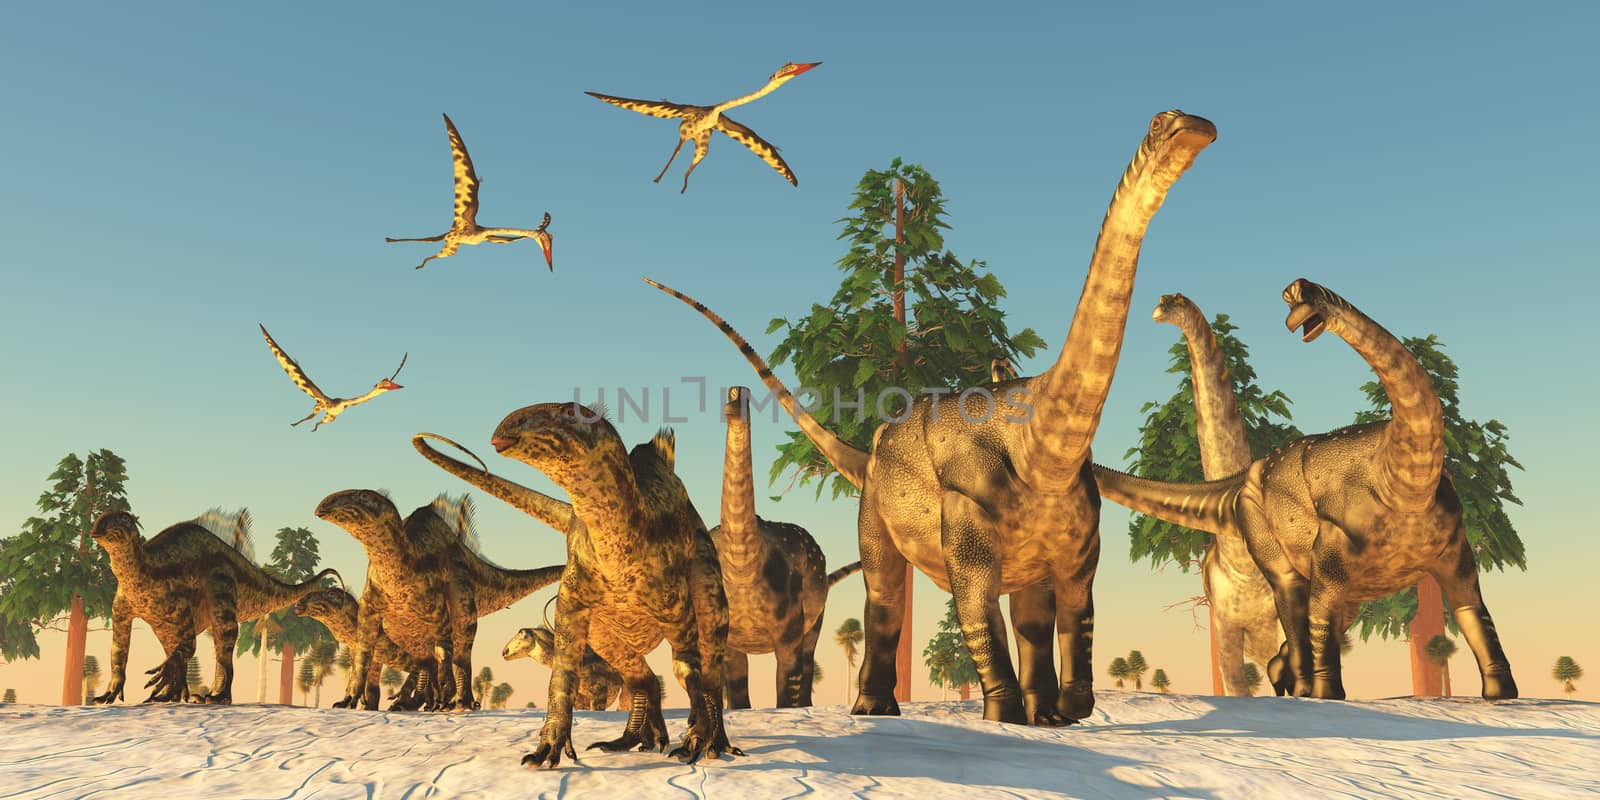 Quetzalcoatlus flying reptiles join Tenontosaurus and Argentinosaurus dinosaurs on a migration in search of water.